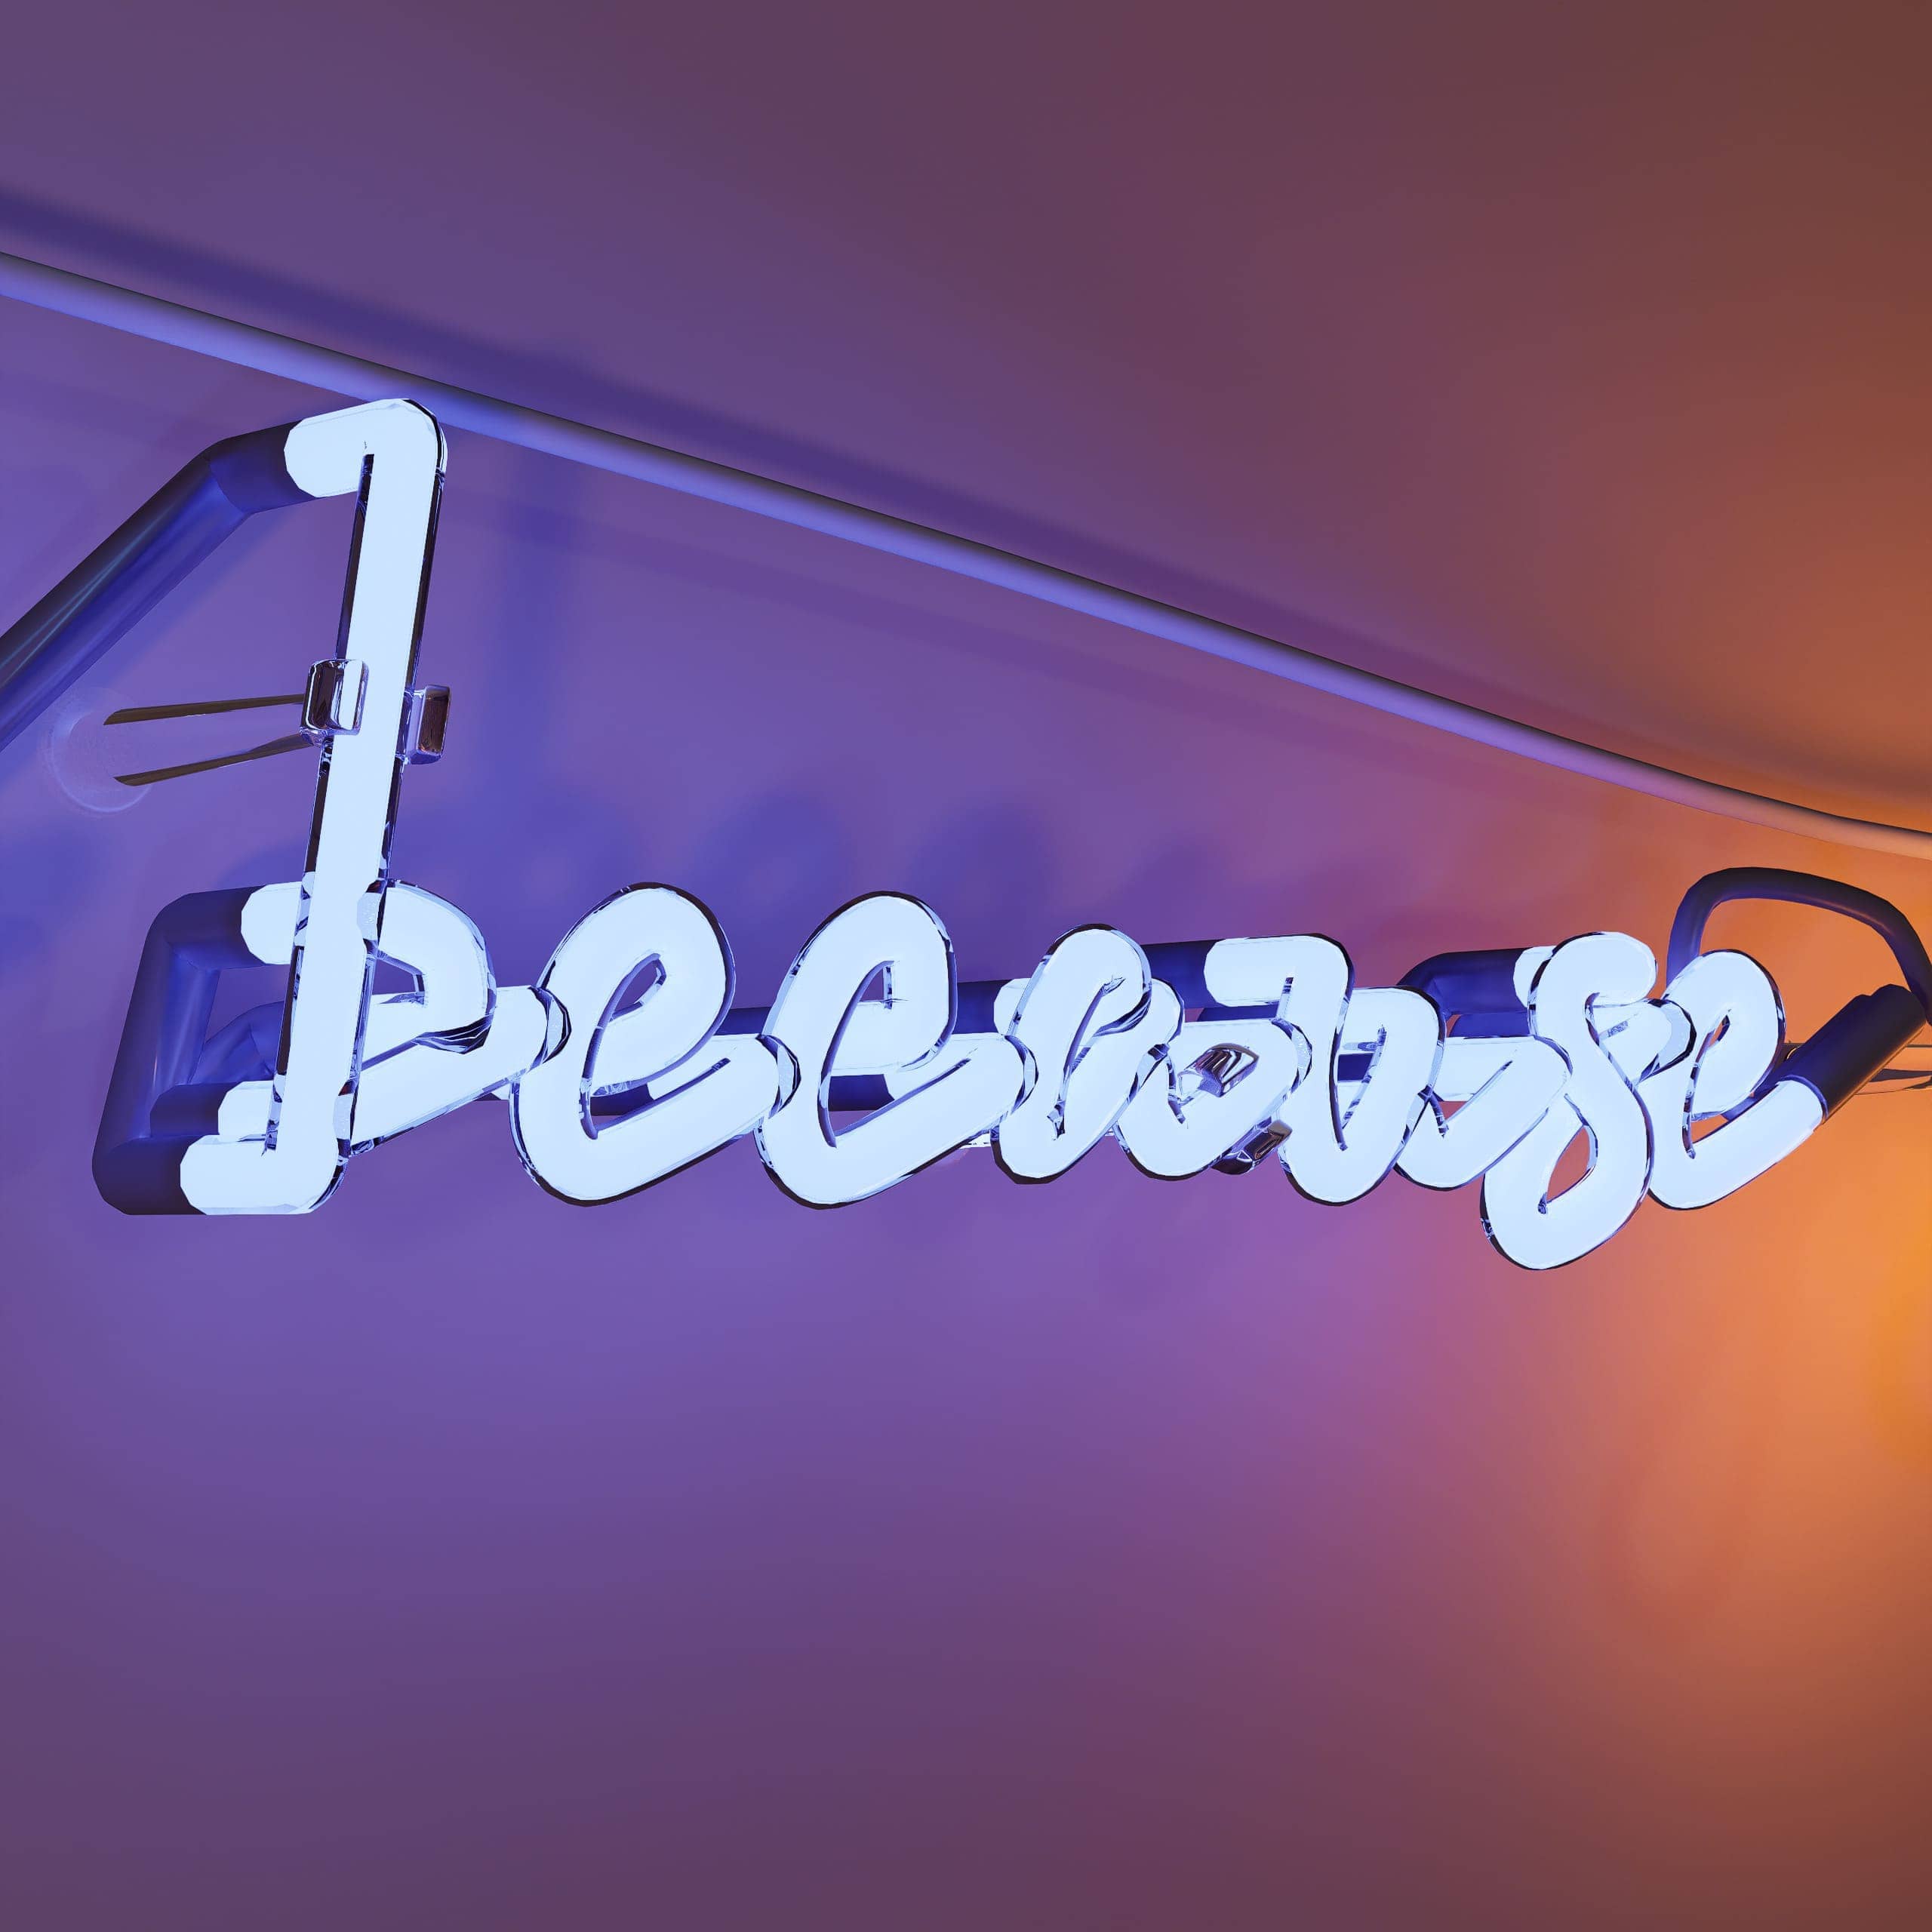 vintage-neon-signs-and-the-bond-of-humanity